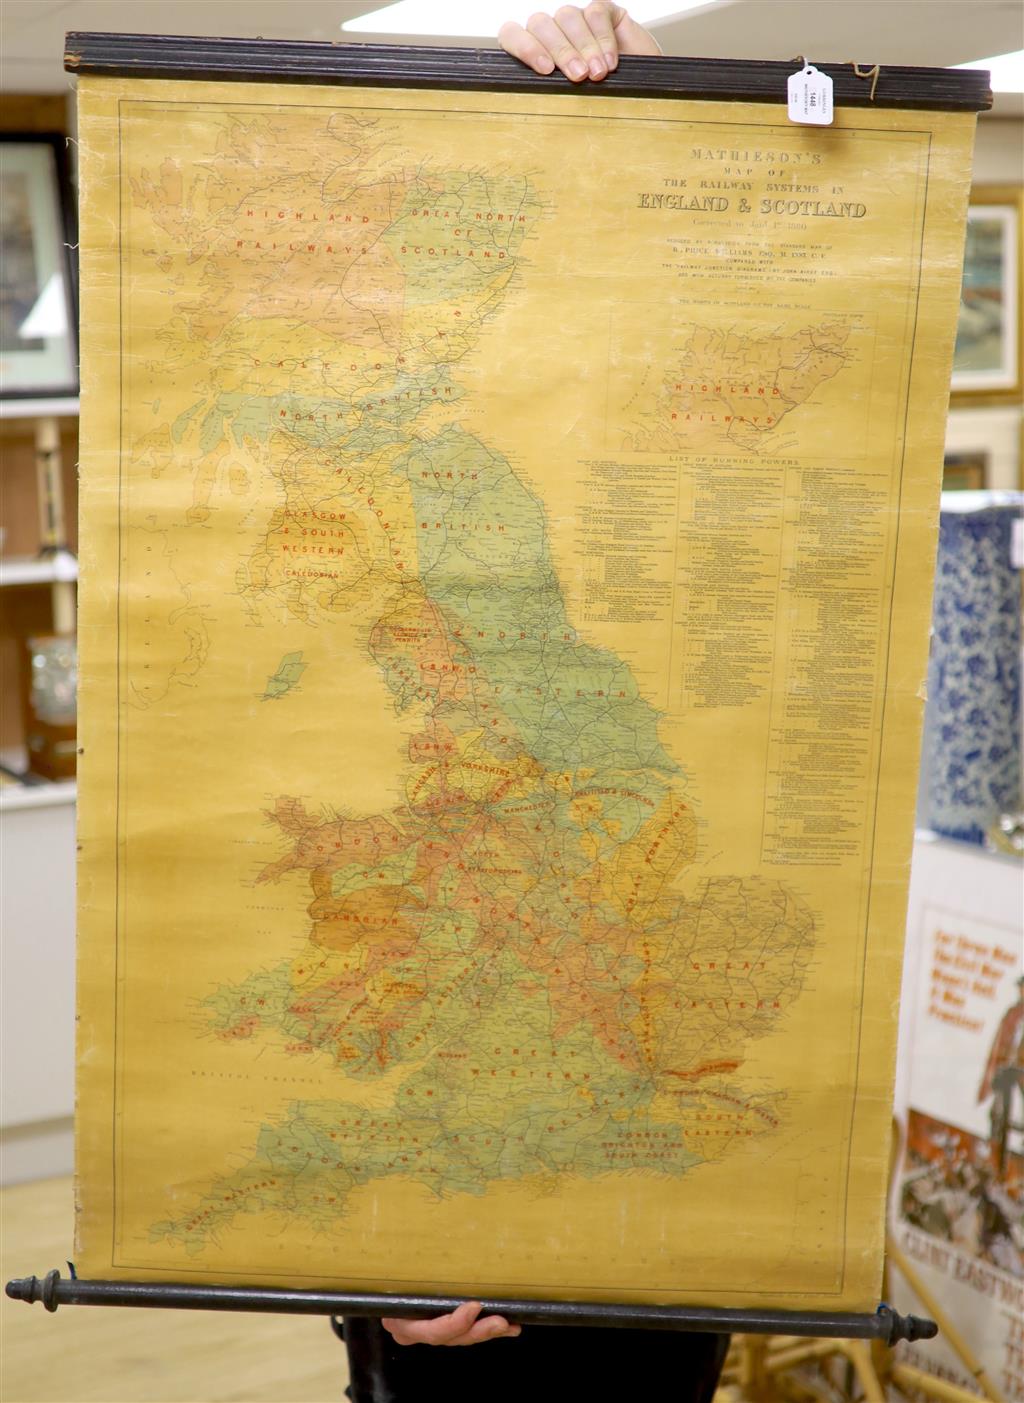 Mathiesons Map of the Railway Systems in England and Scotland corrected to January 1st 1880